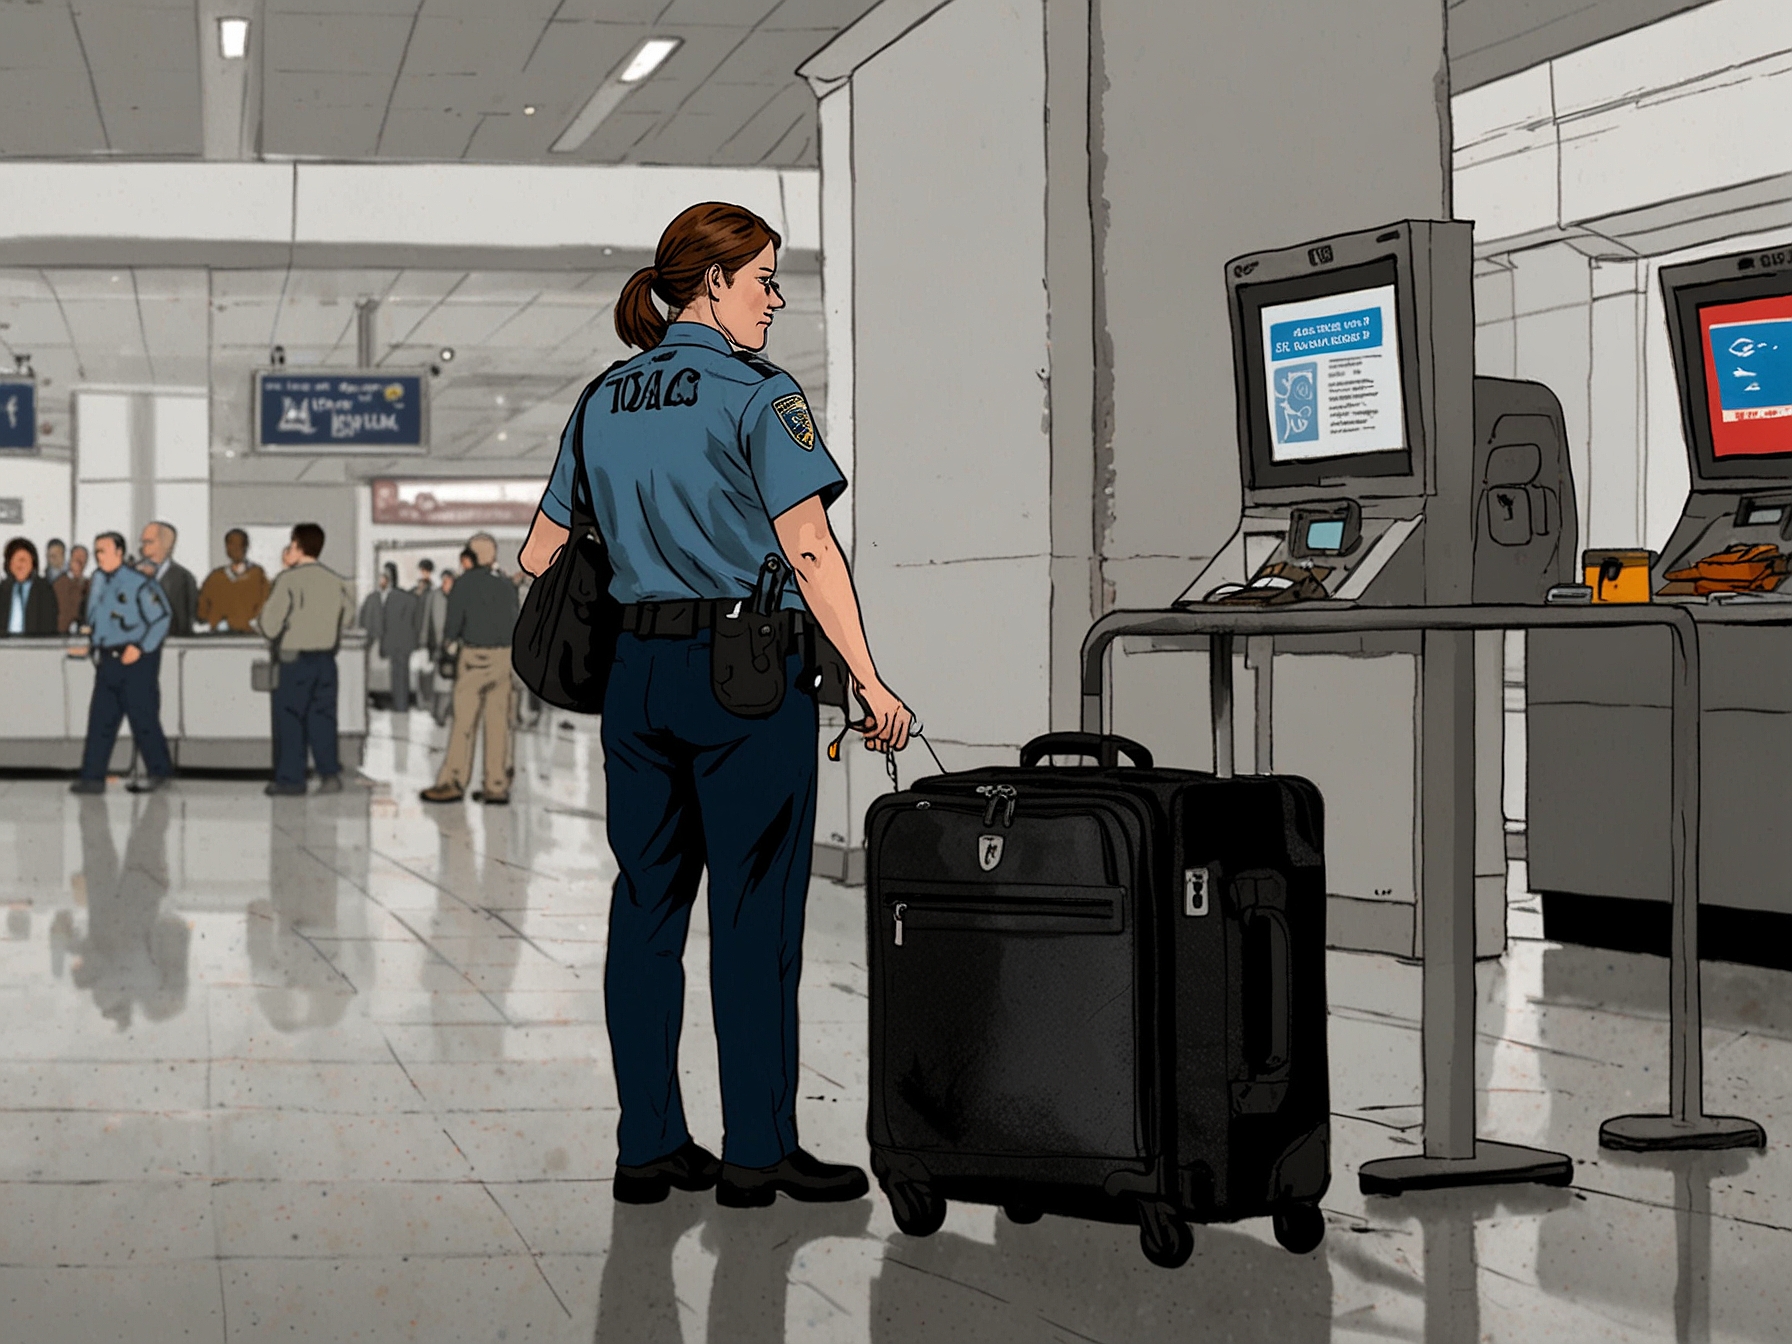 A TSA agent examines a carry-on bag at Dulles International Airport, highlighting the strict protocols involved in airport security that led to Rep. Victoria Spartz's weapons violation charge.